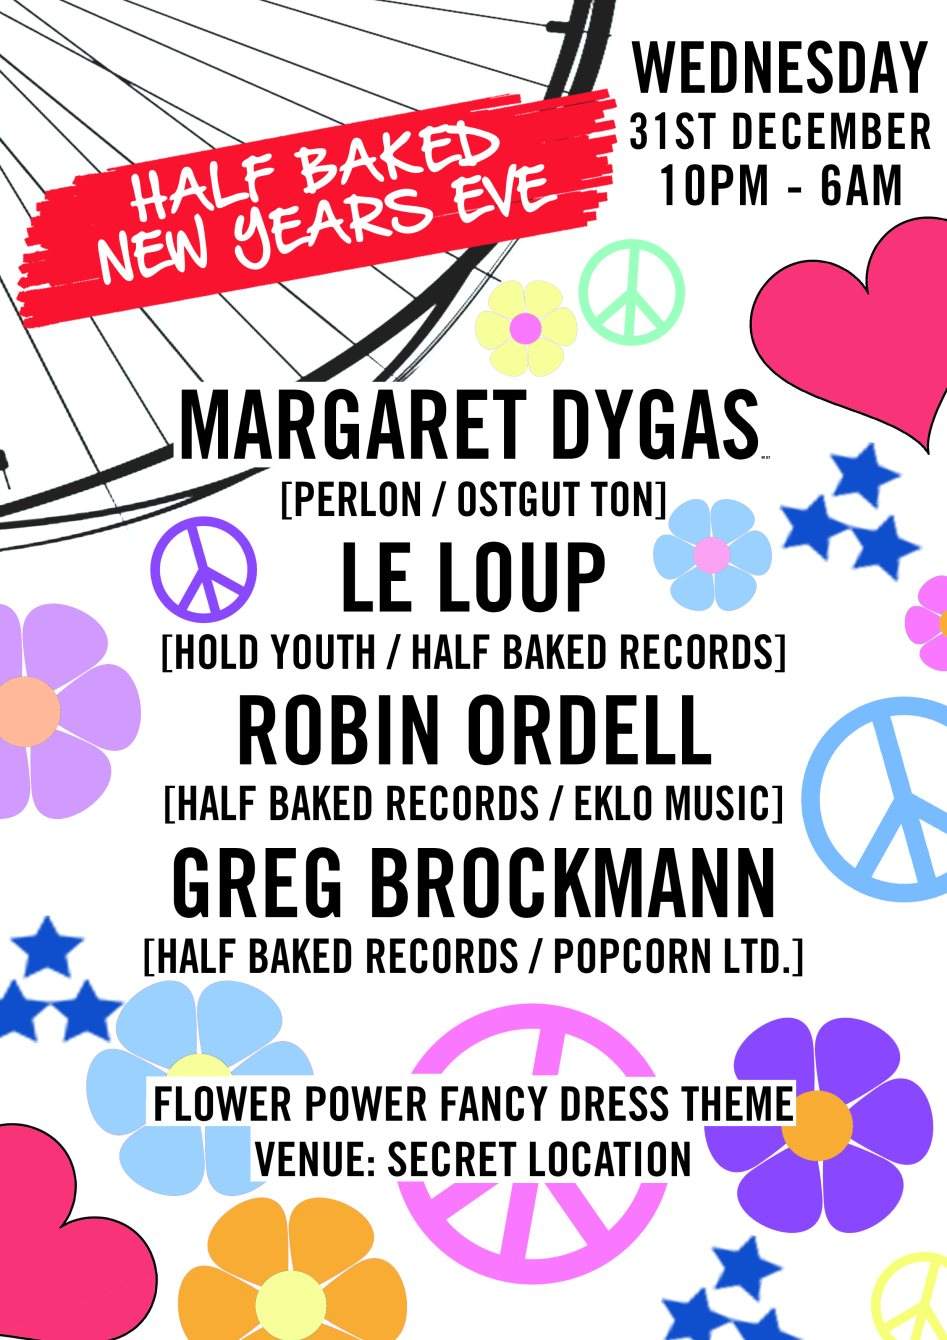 Half Baked 'NYE Special - Fancy Dress - Margaret Dygas + Seuil + Le Loup - Página frontal